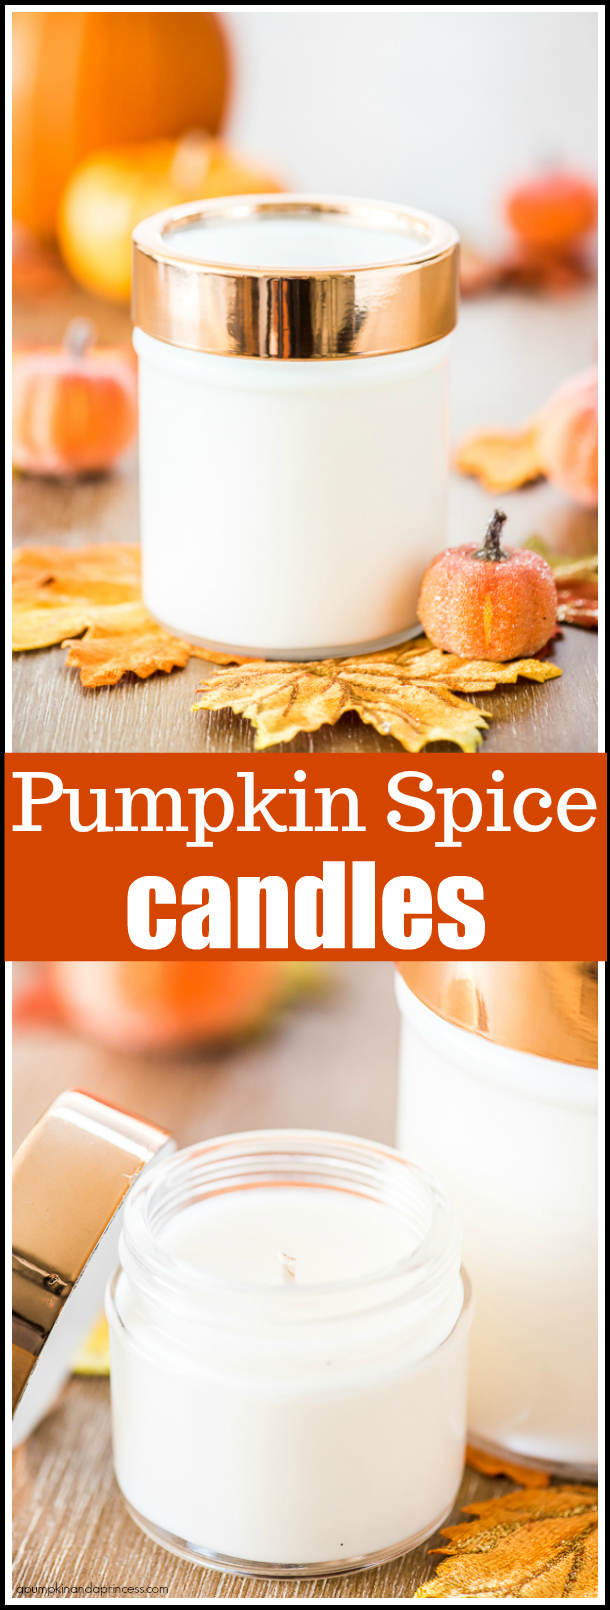 DIY Pumpkin Spice Candle – how to make pumpkin spice candles for fall. This candle makes a great handmade gift idea!